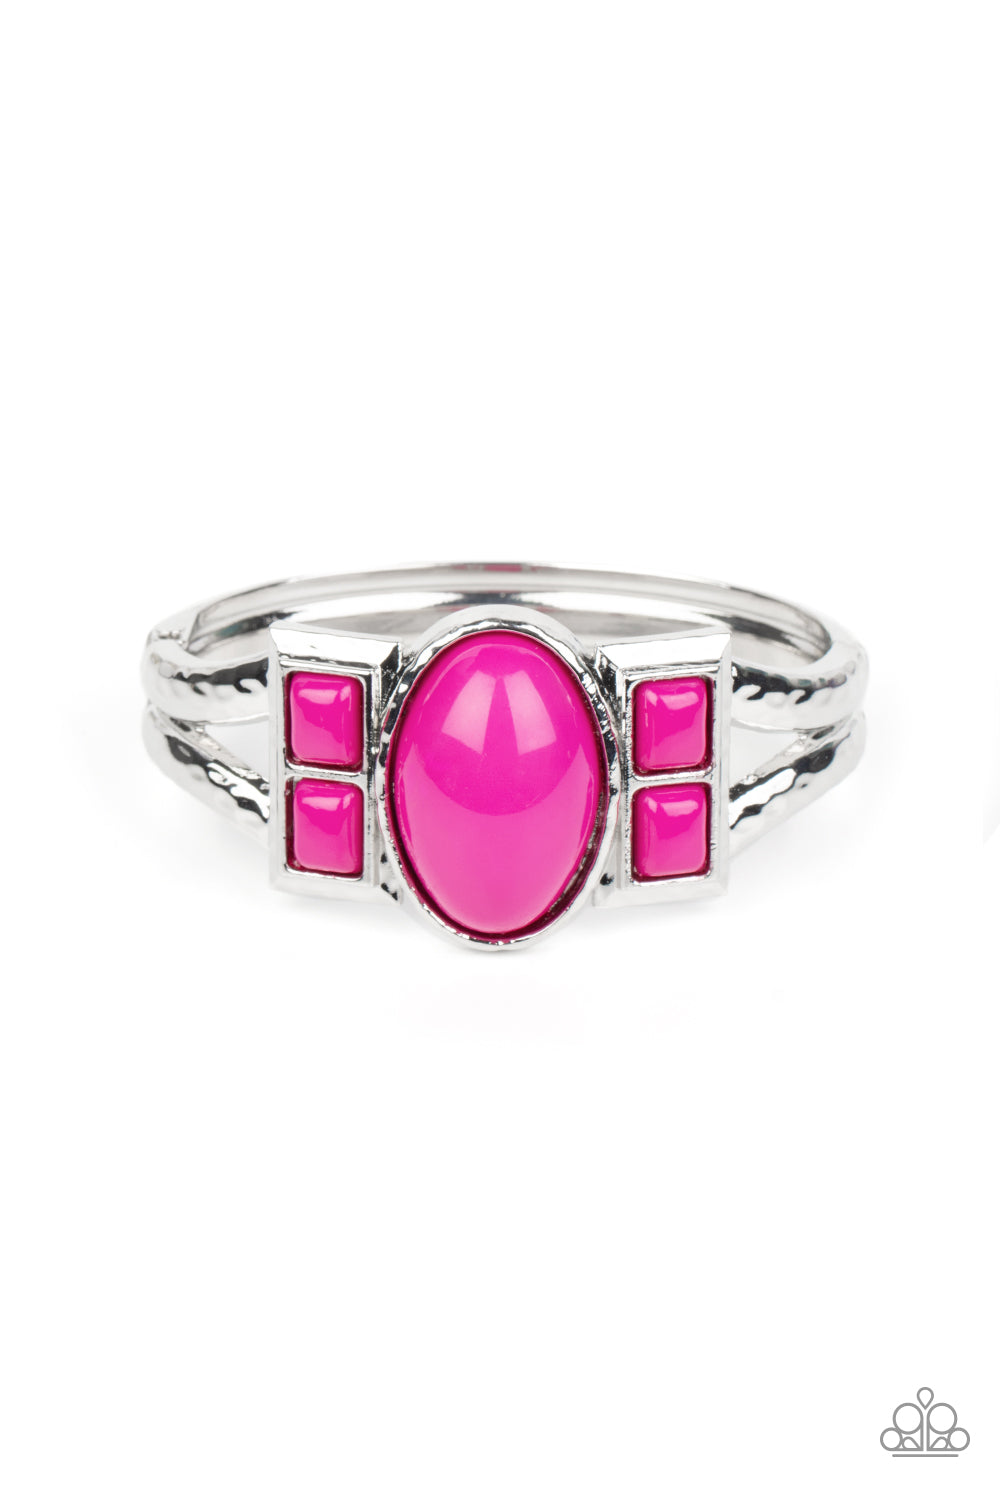 A Touch of Tiki Pink Hinge Bracelet - Paparazzi Accessories  An oversized oval Fuchsia Fedora bead is flanked by pairs of stacked Fuchsia Fedora square beads across the center of a hammered silver bangle-like bracelet, creating a bold pop of color atop the wrist. Features a hinged closure.  Sold as one individual bracelet.